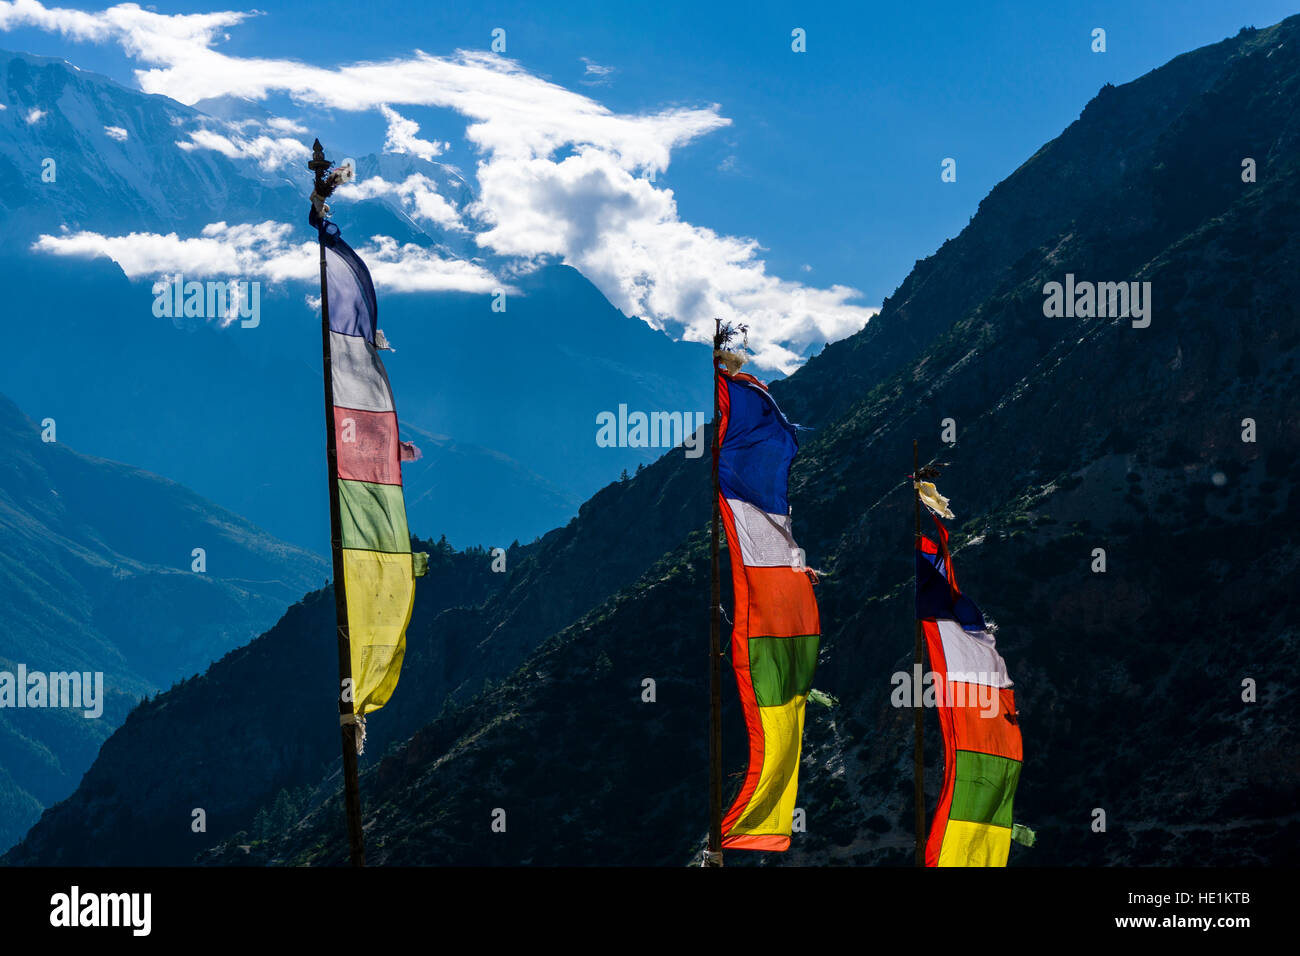 Colorful buddhist prayer flags at a mountain slope above the Upper Marsyangdi valley Stock Photo